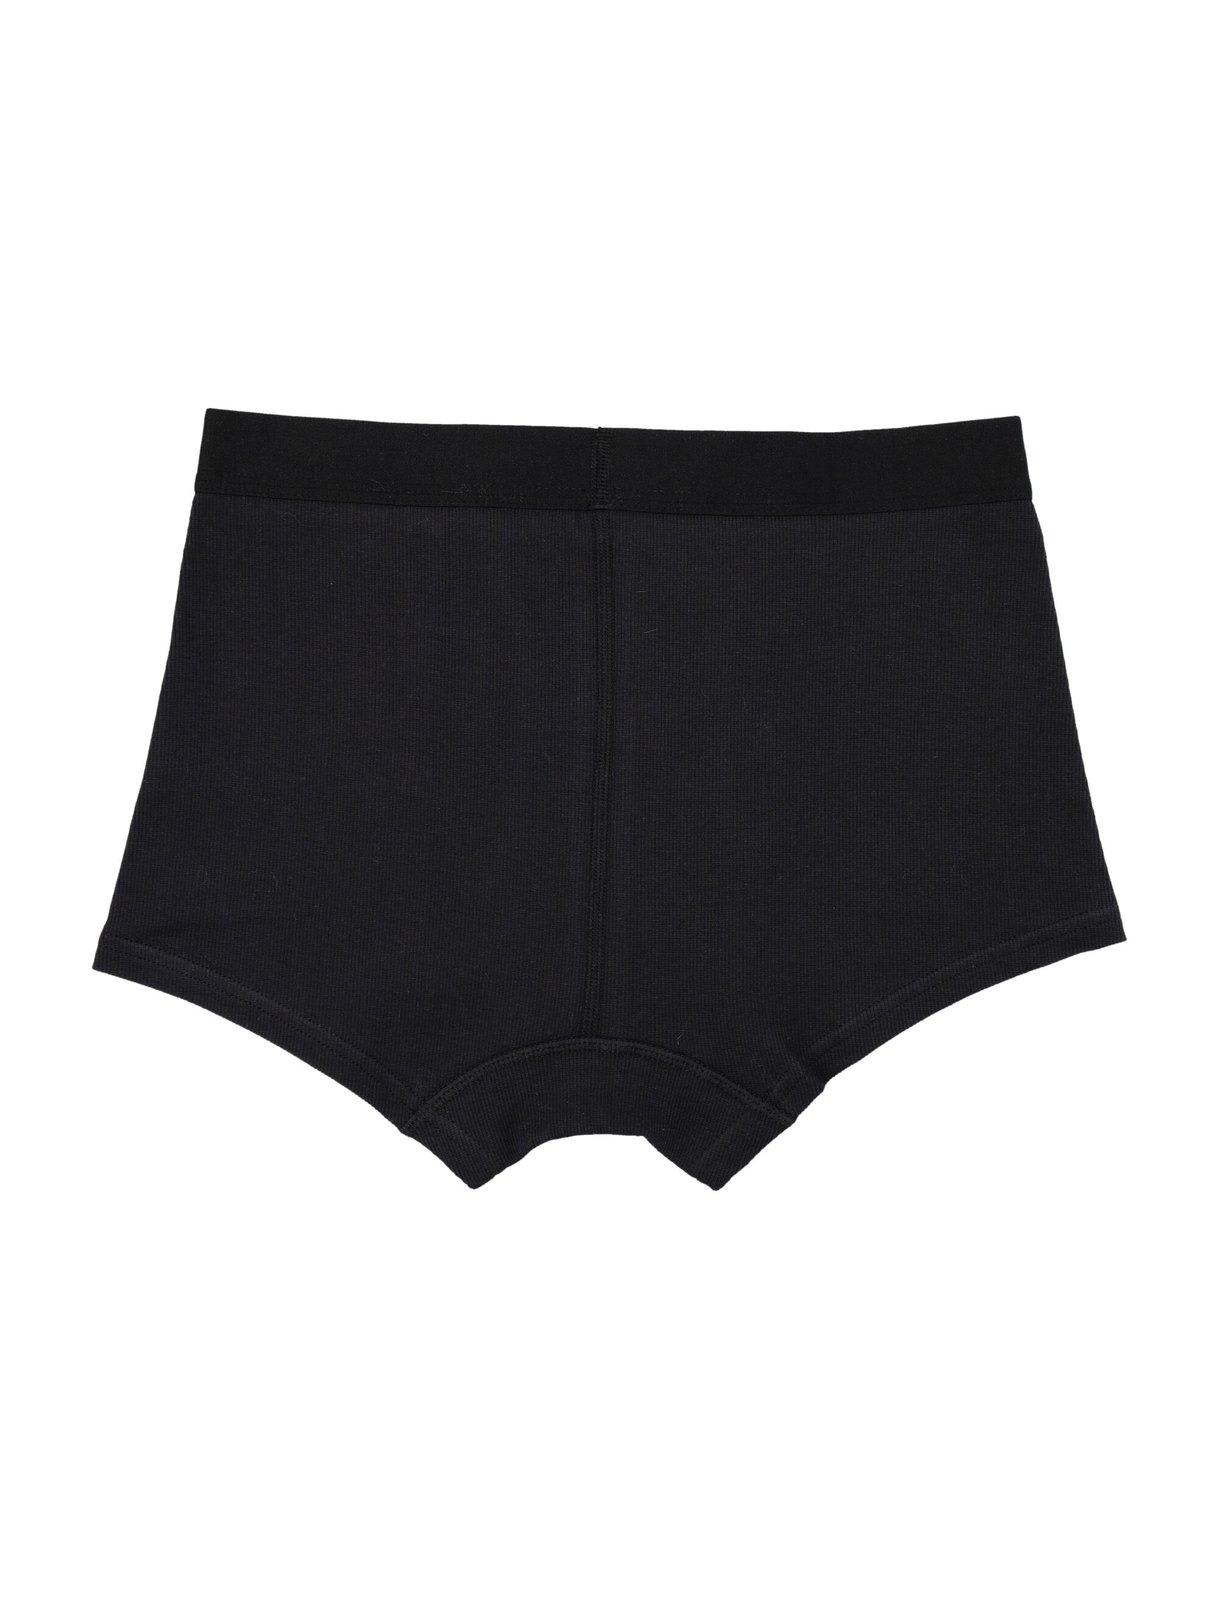 Shop Marine Serre Logo Embroidered Ribbed Boxers In Black